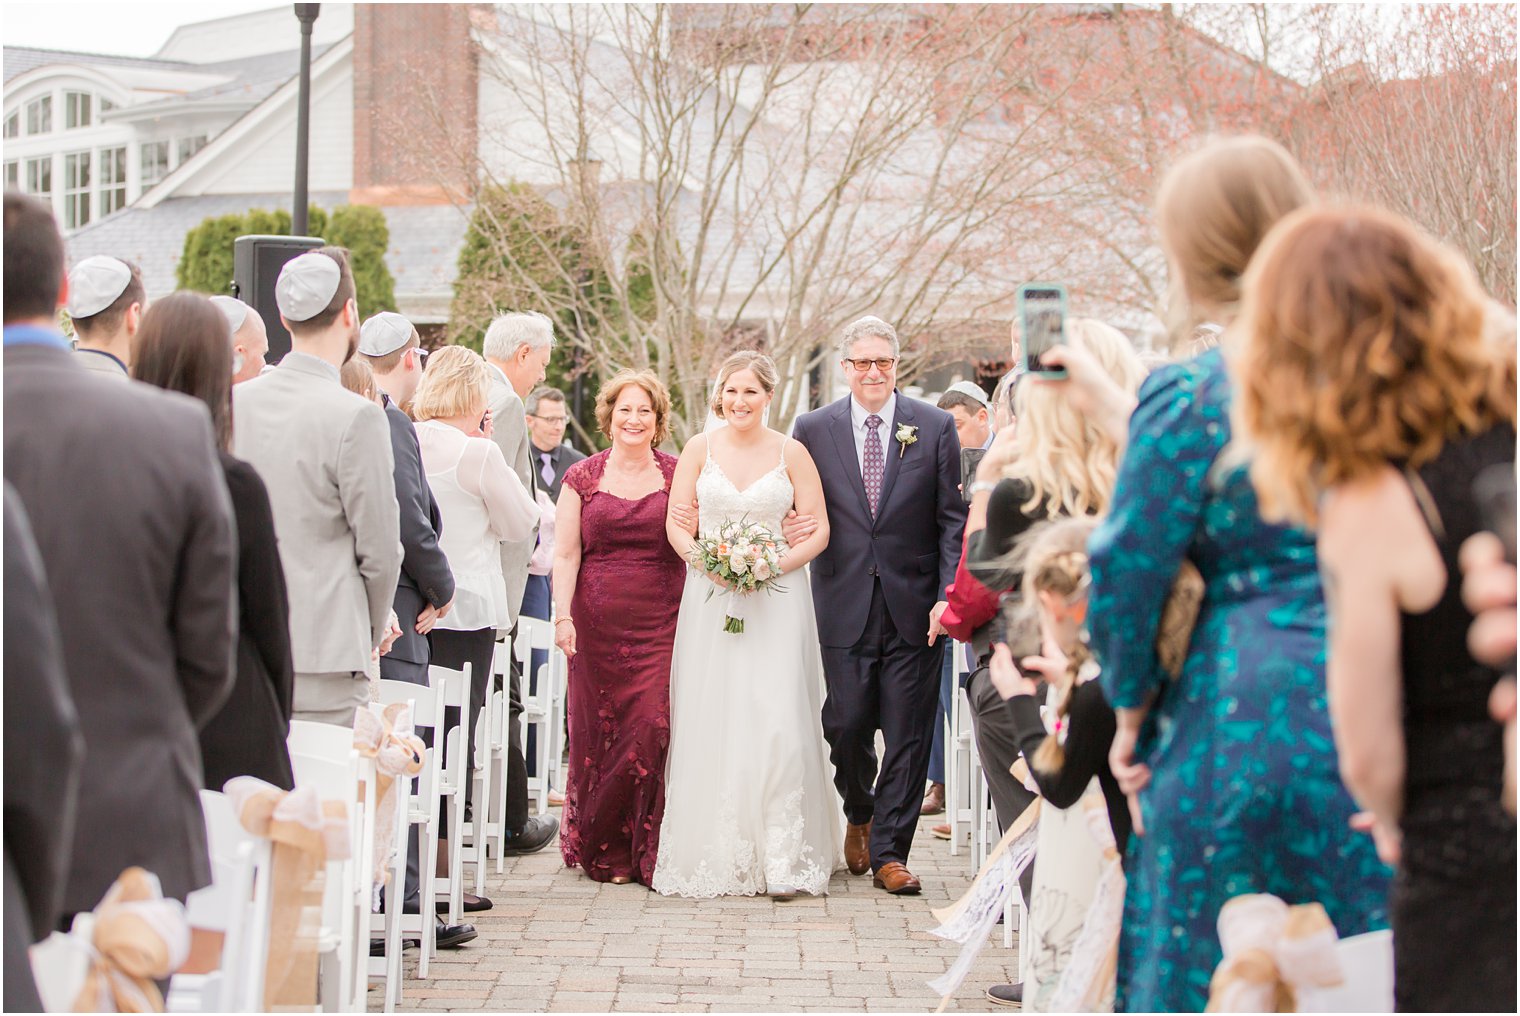 Bride walking down the aisle | Outdoor wedding ceremony at The Mill Lakeside Manor Wedding